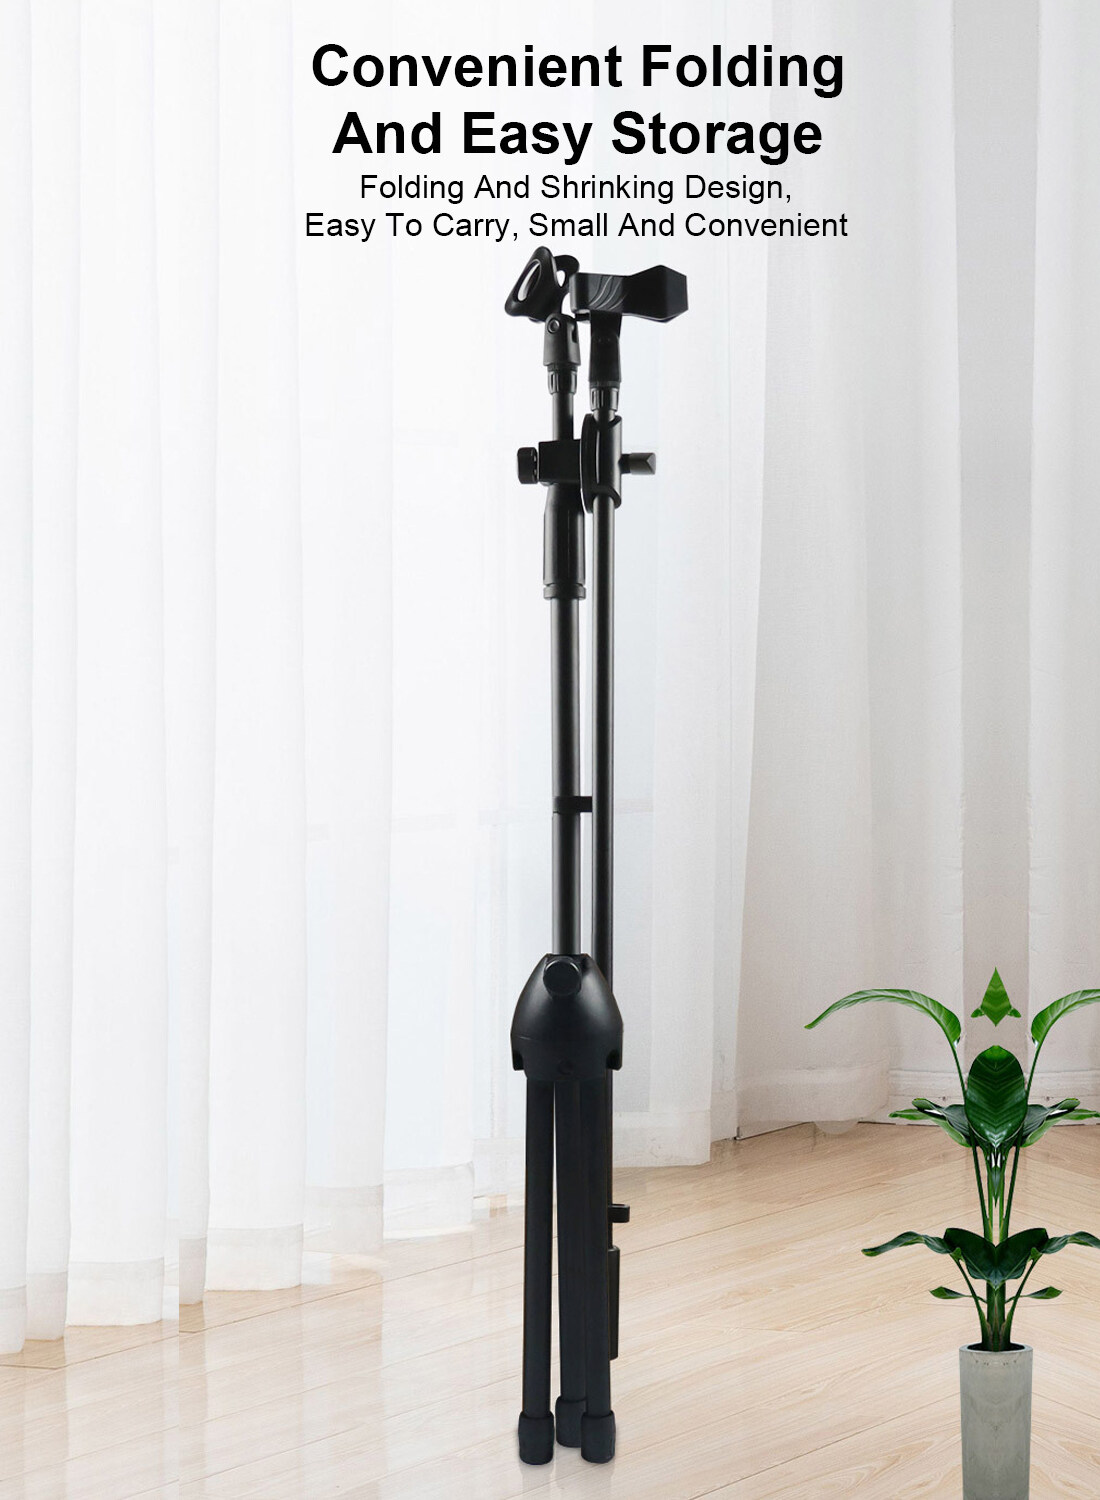 Double Clips Microphone Tripod Floor Stand for Performances, Karaoke, Dancing, and Mobile Live Streaming, 103B Black